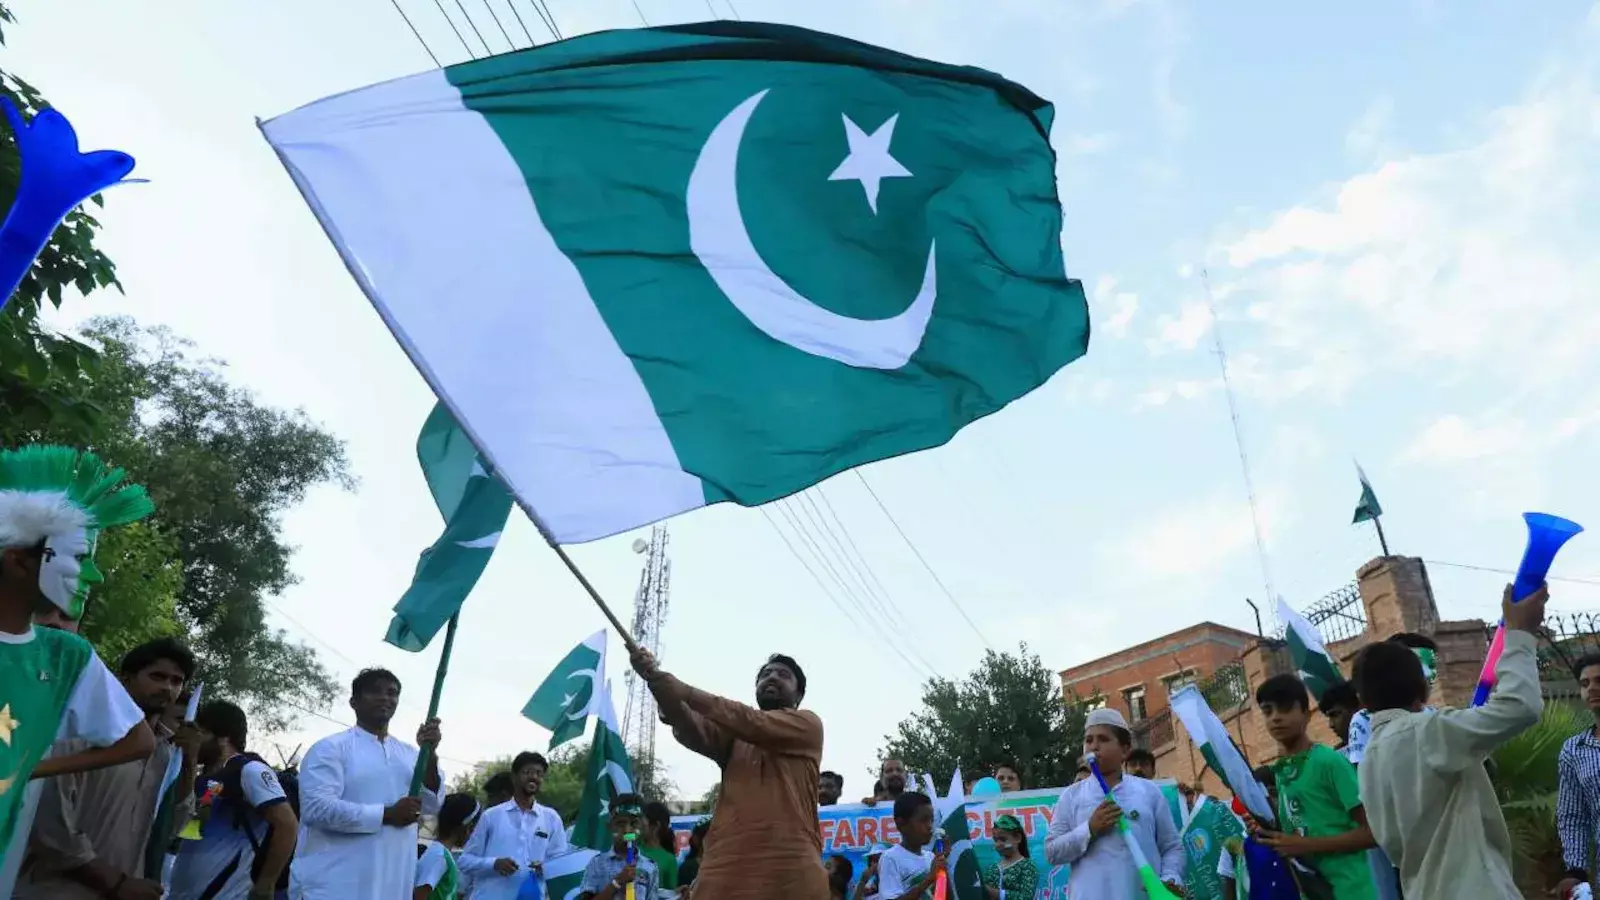 Pakistan elections: No clear victor in sight as vote counting process nears completion